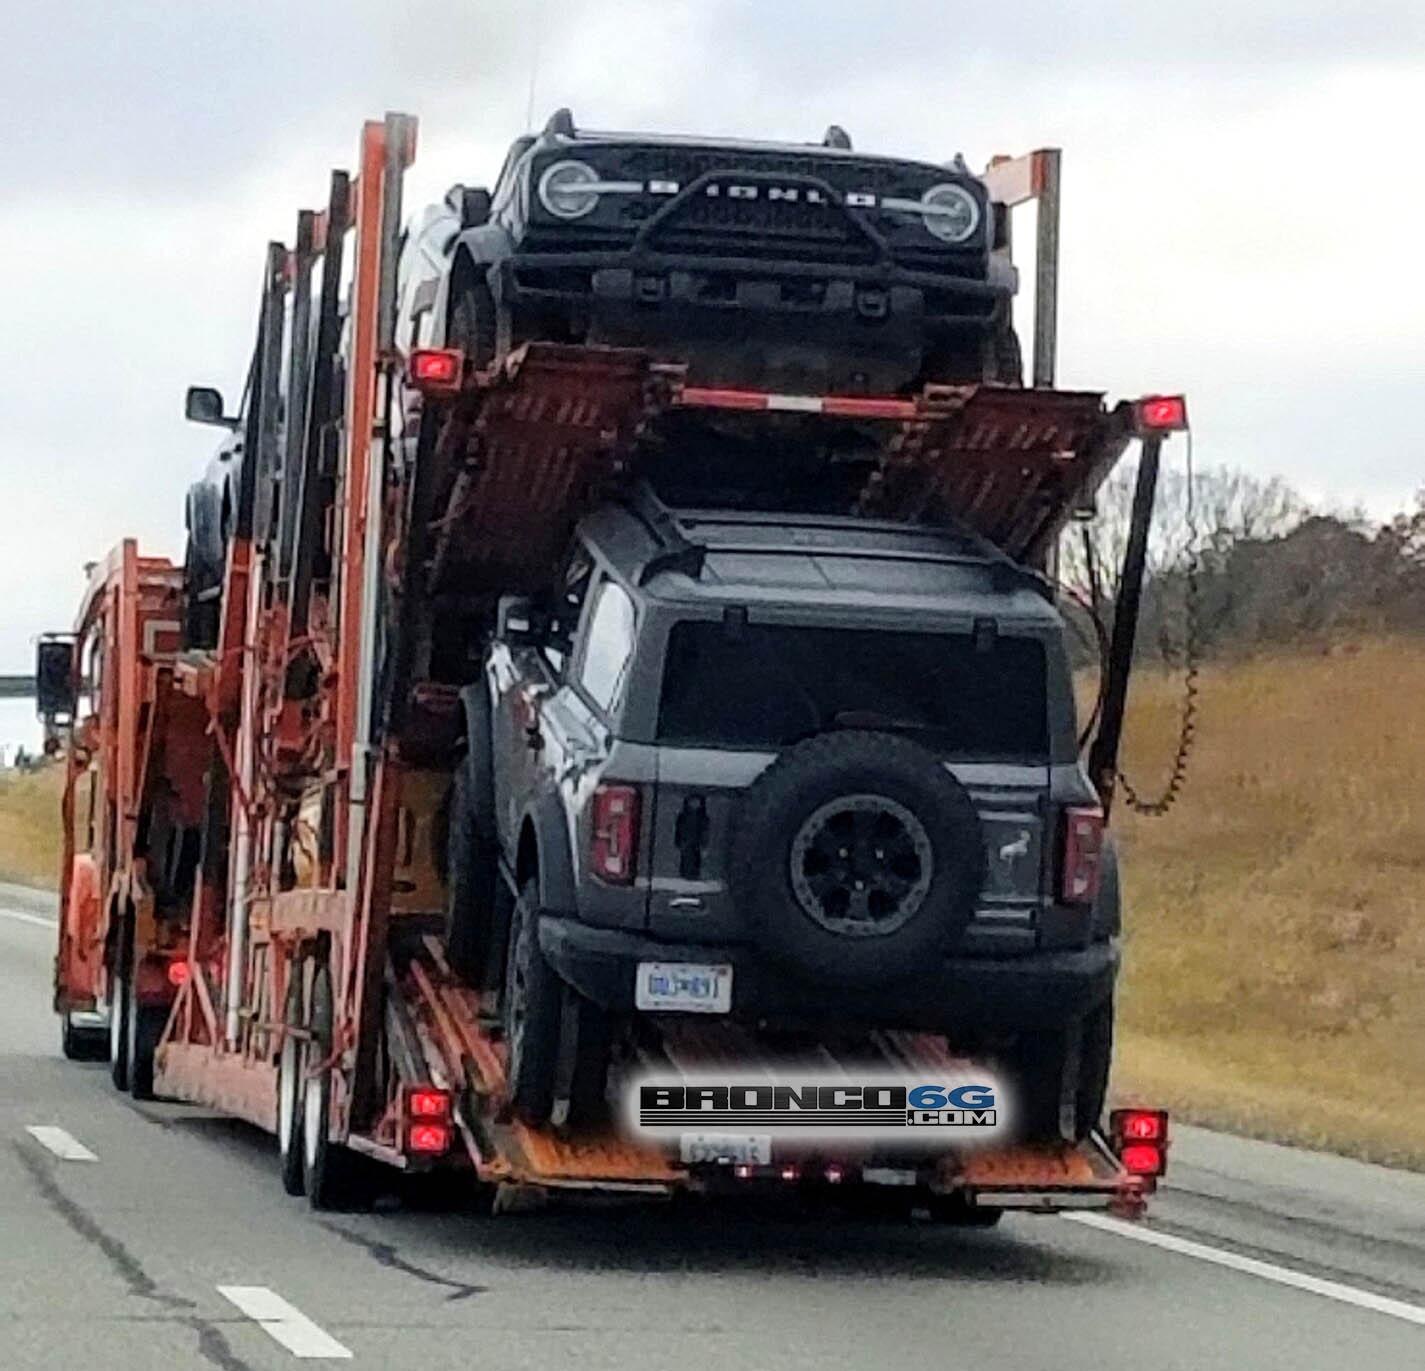 Ford Bronco Spotted: Bronco Wildtrak & Outer Banks in Carbonized Gray, Rapid Red, Cyber Orange, Black 2021 Bronco Carbonized Gray 2 Door b